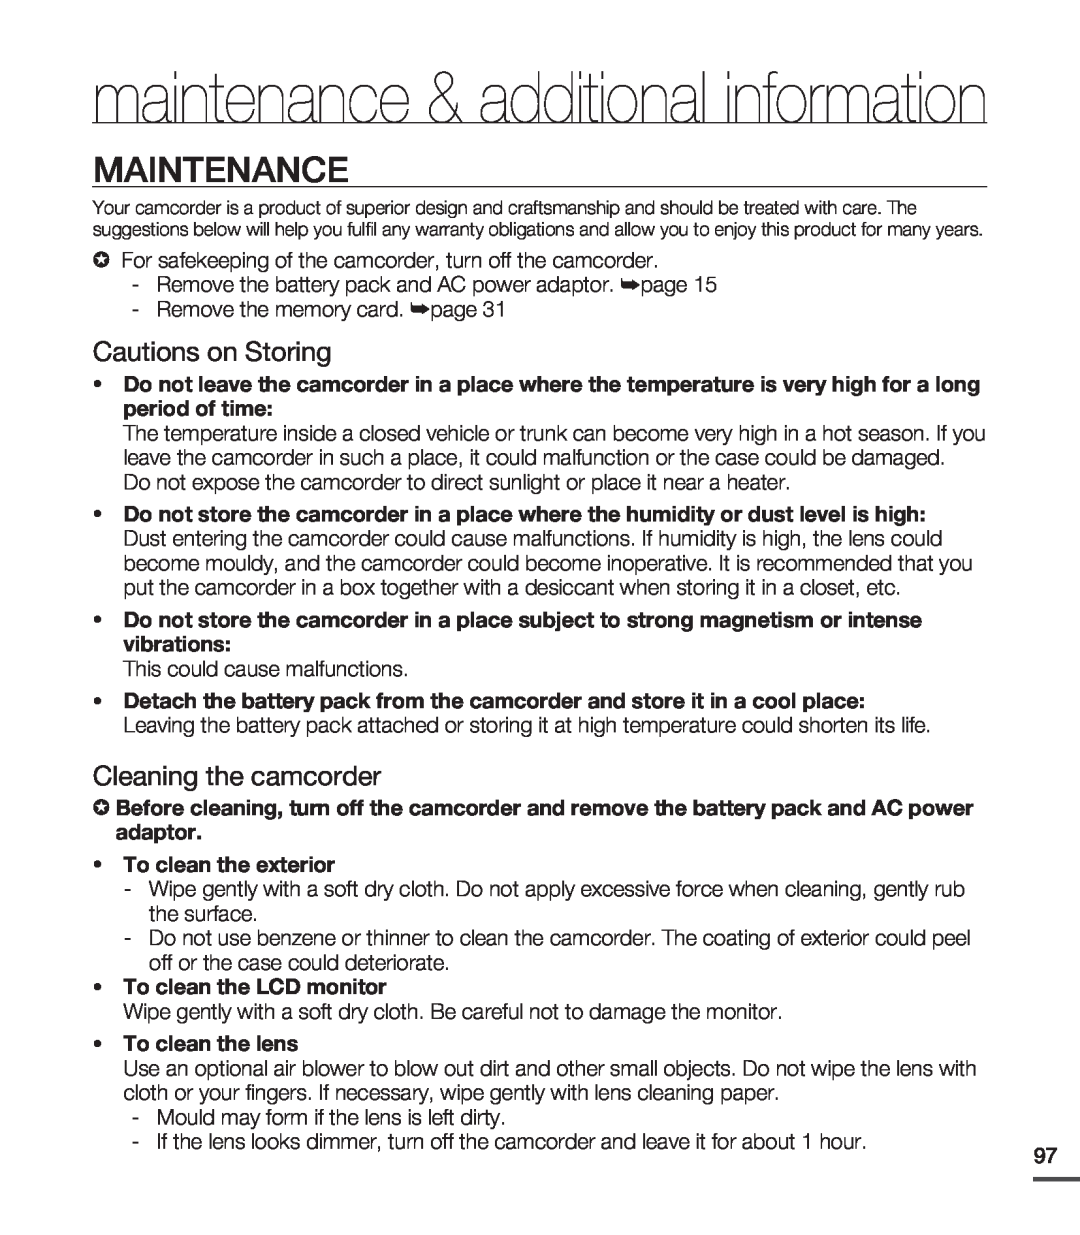 Samsung SMX-C20BP/XEK manual maintenance & additional information, Maintenance, Cautions on Storing, Cleaning the camcorder 